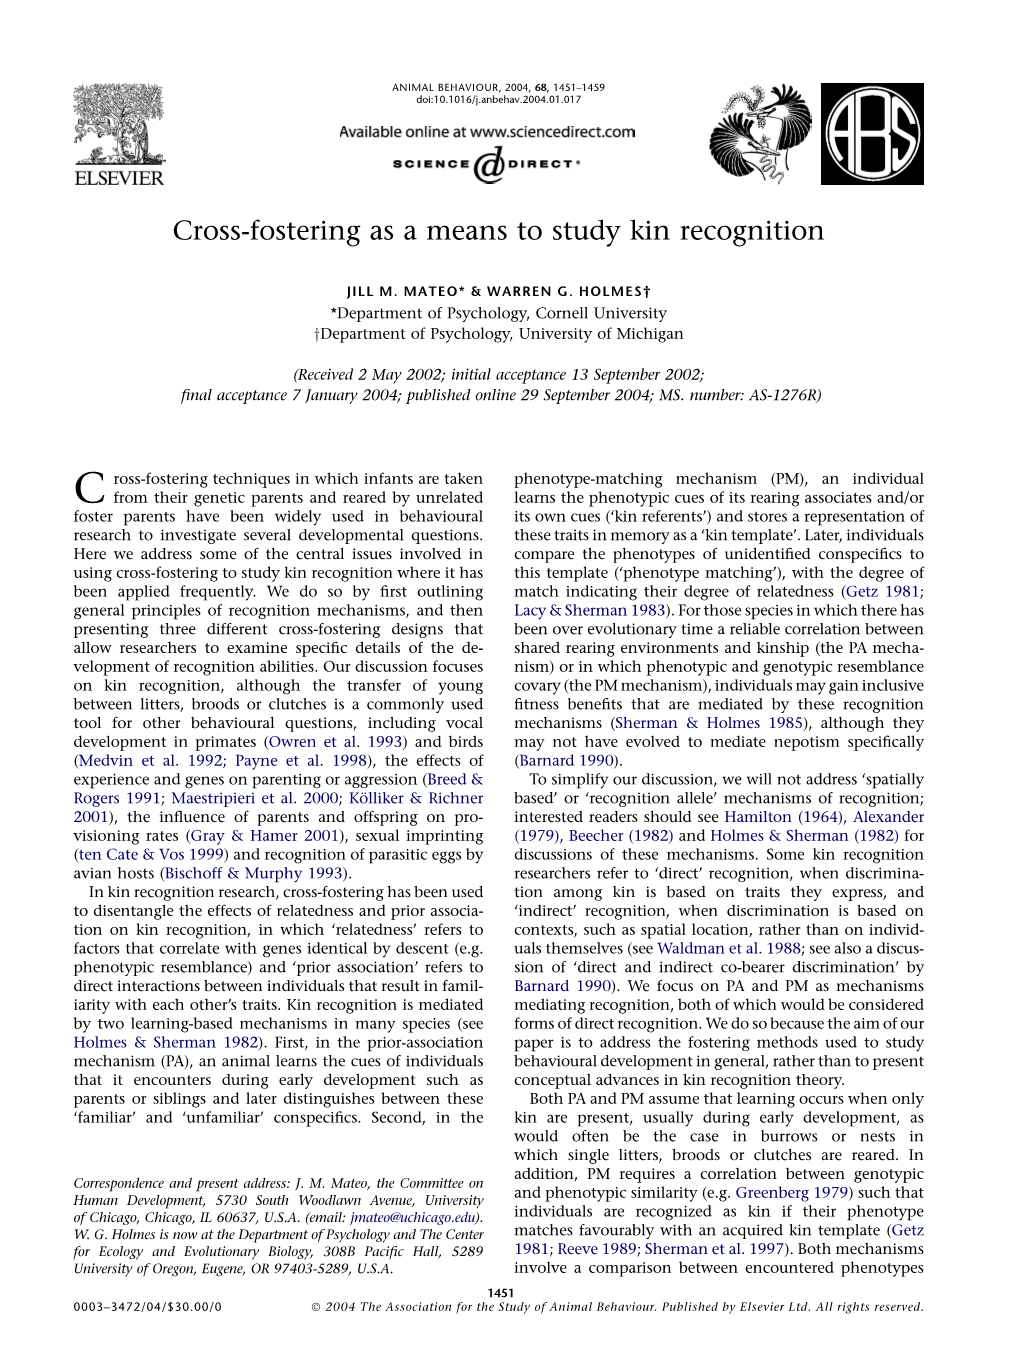 Cross-Fostering As a Means to Study Kin Recognition